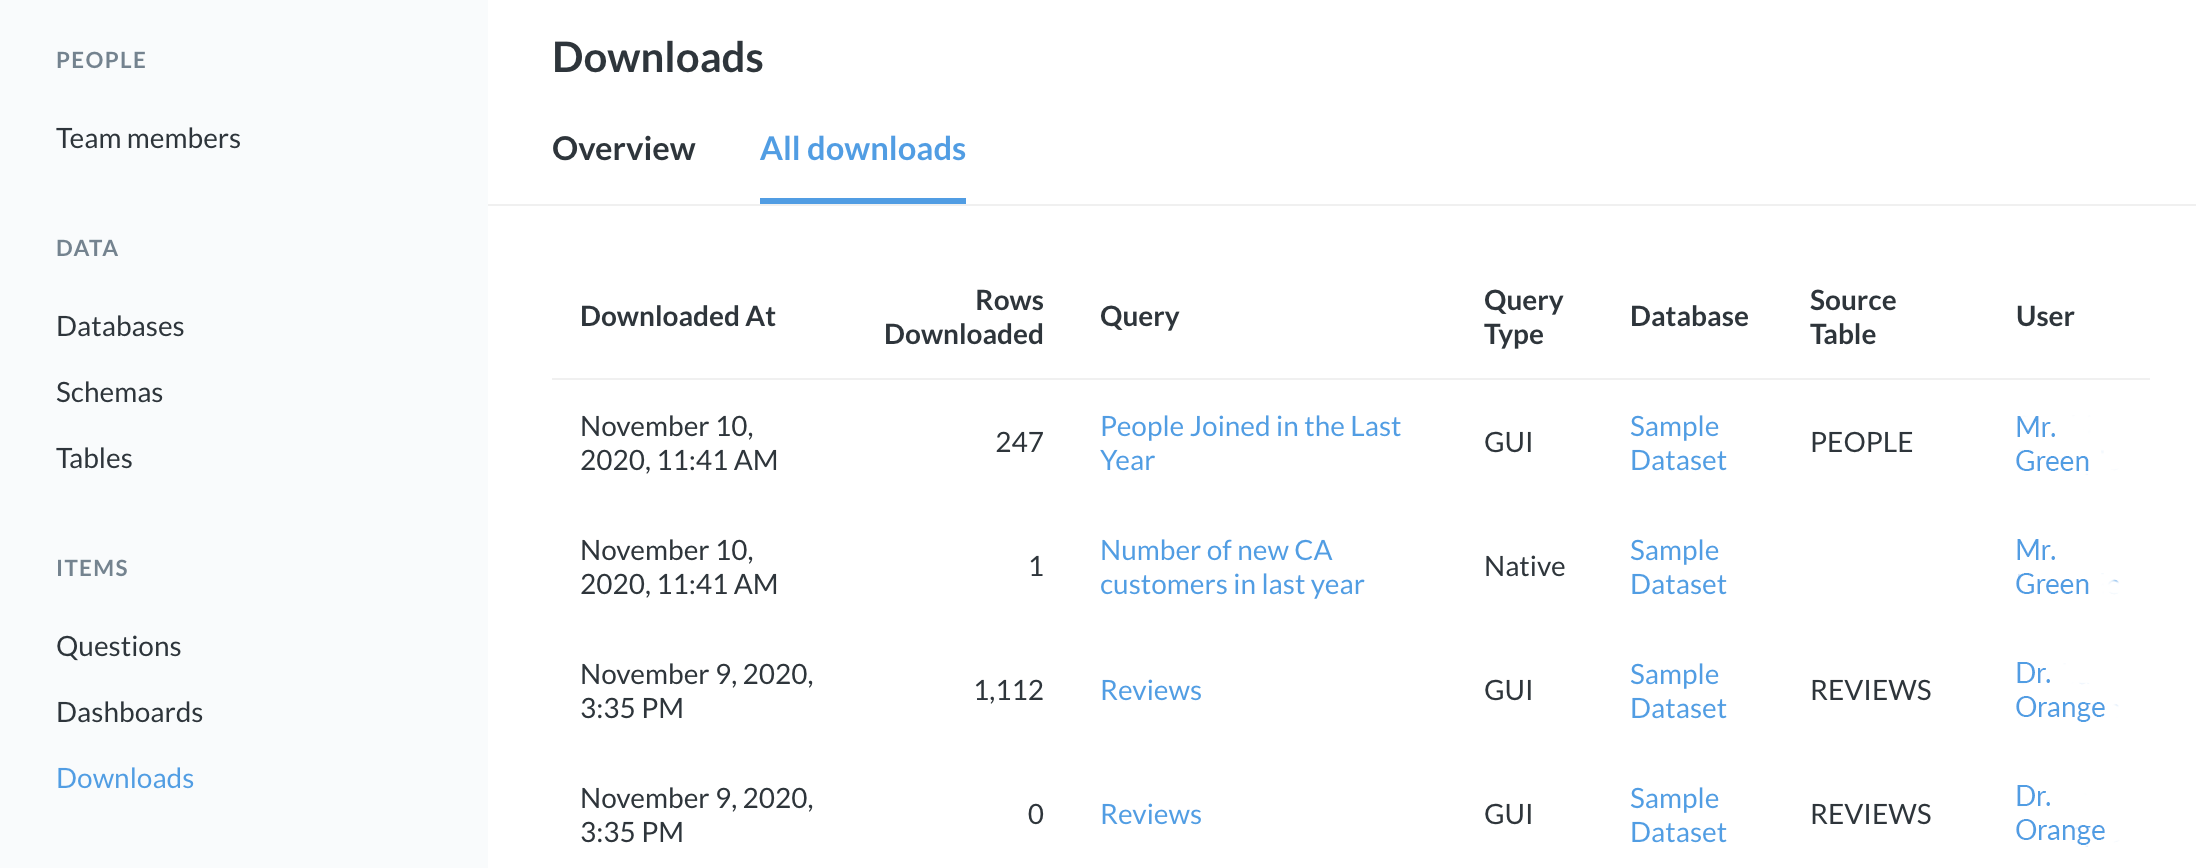 The Audit Log for the Downloads section.